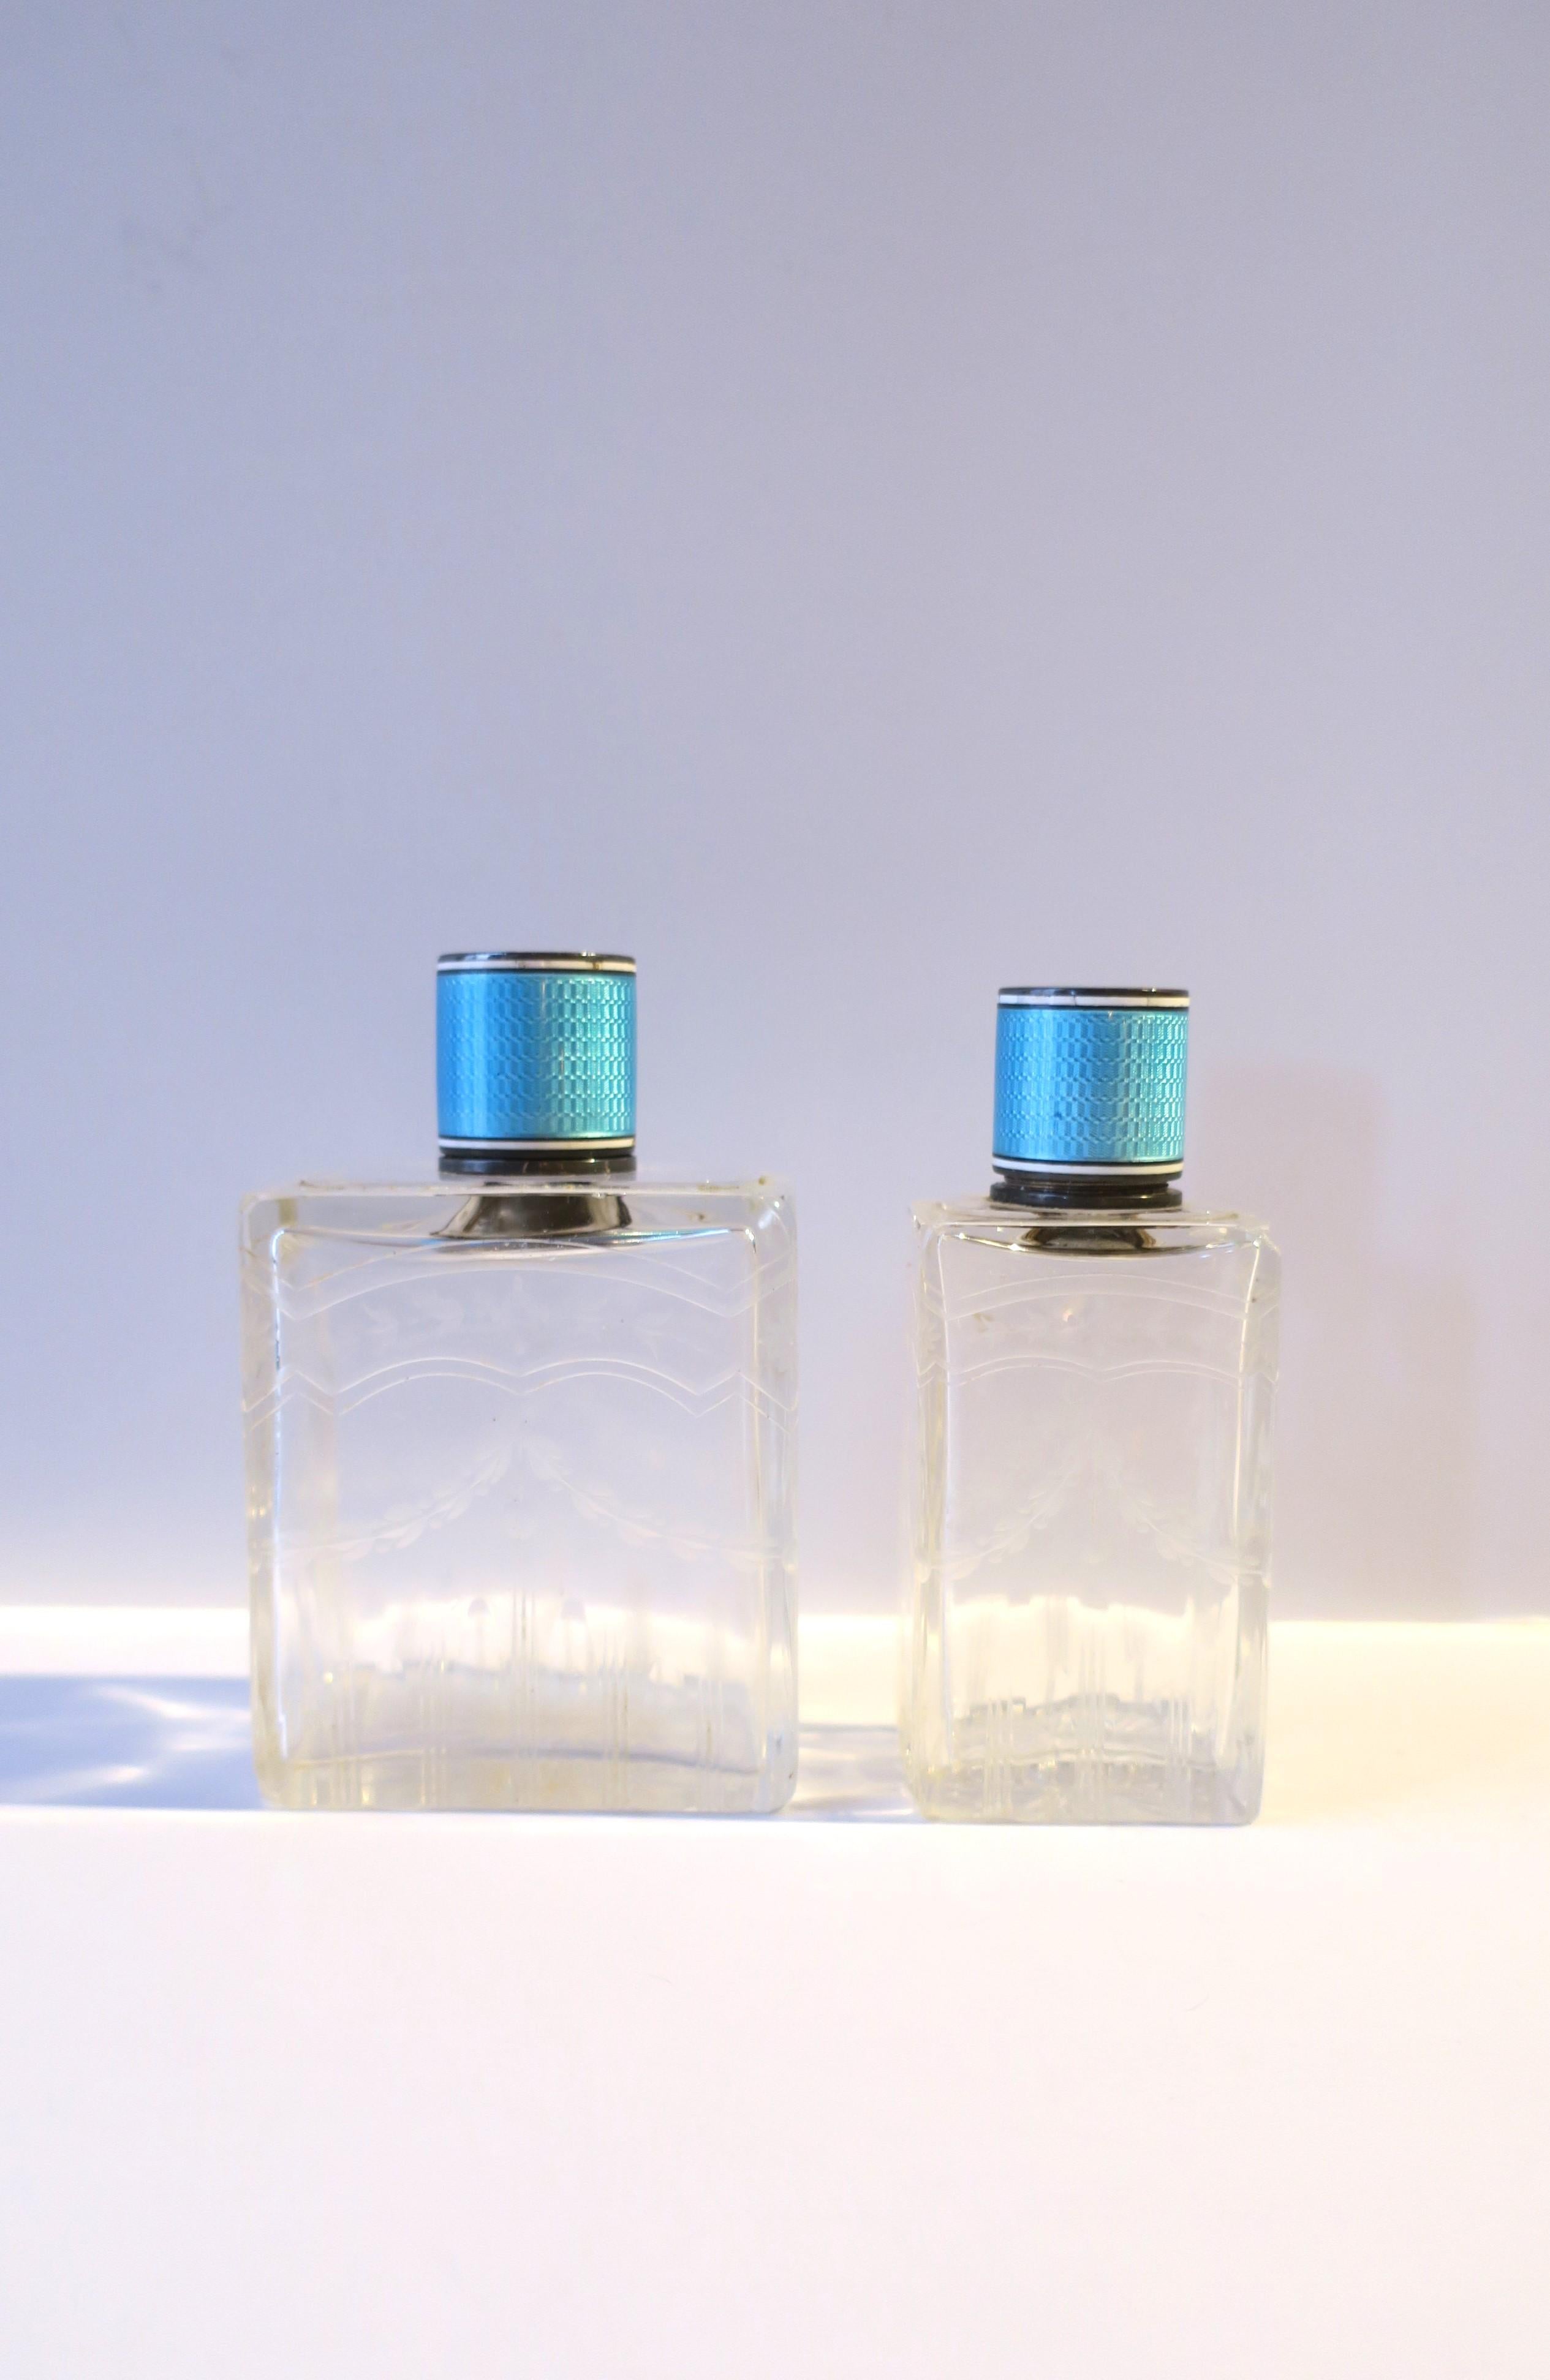 A pair/set of two (2) French crystal, sterling silver, and light blue guilloche enamel topped vanity bottles, circa late-19th century to early-20th century, France. Bottle tops are a beautiful sterling silver and light blue and white guilloche